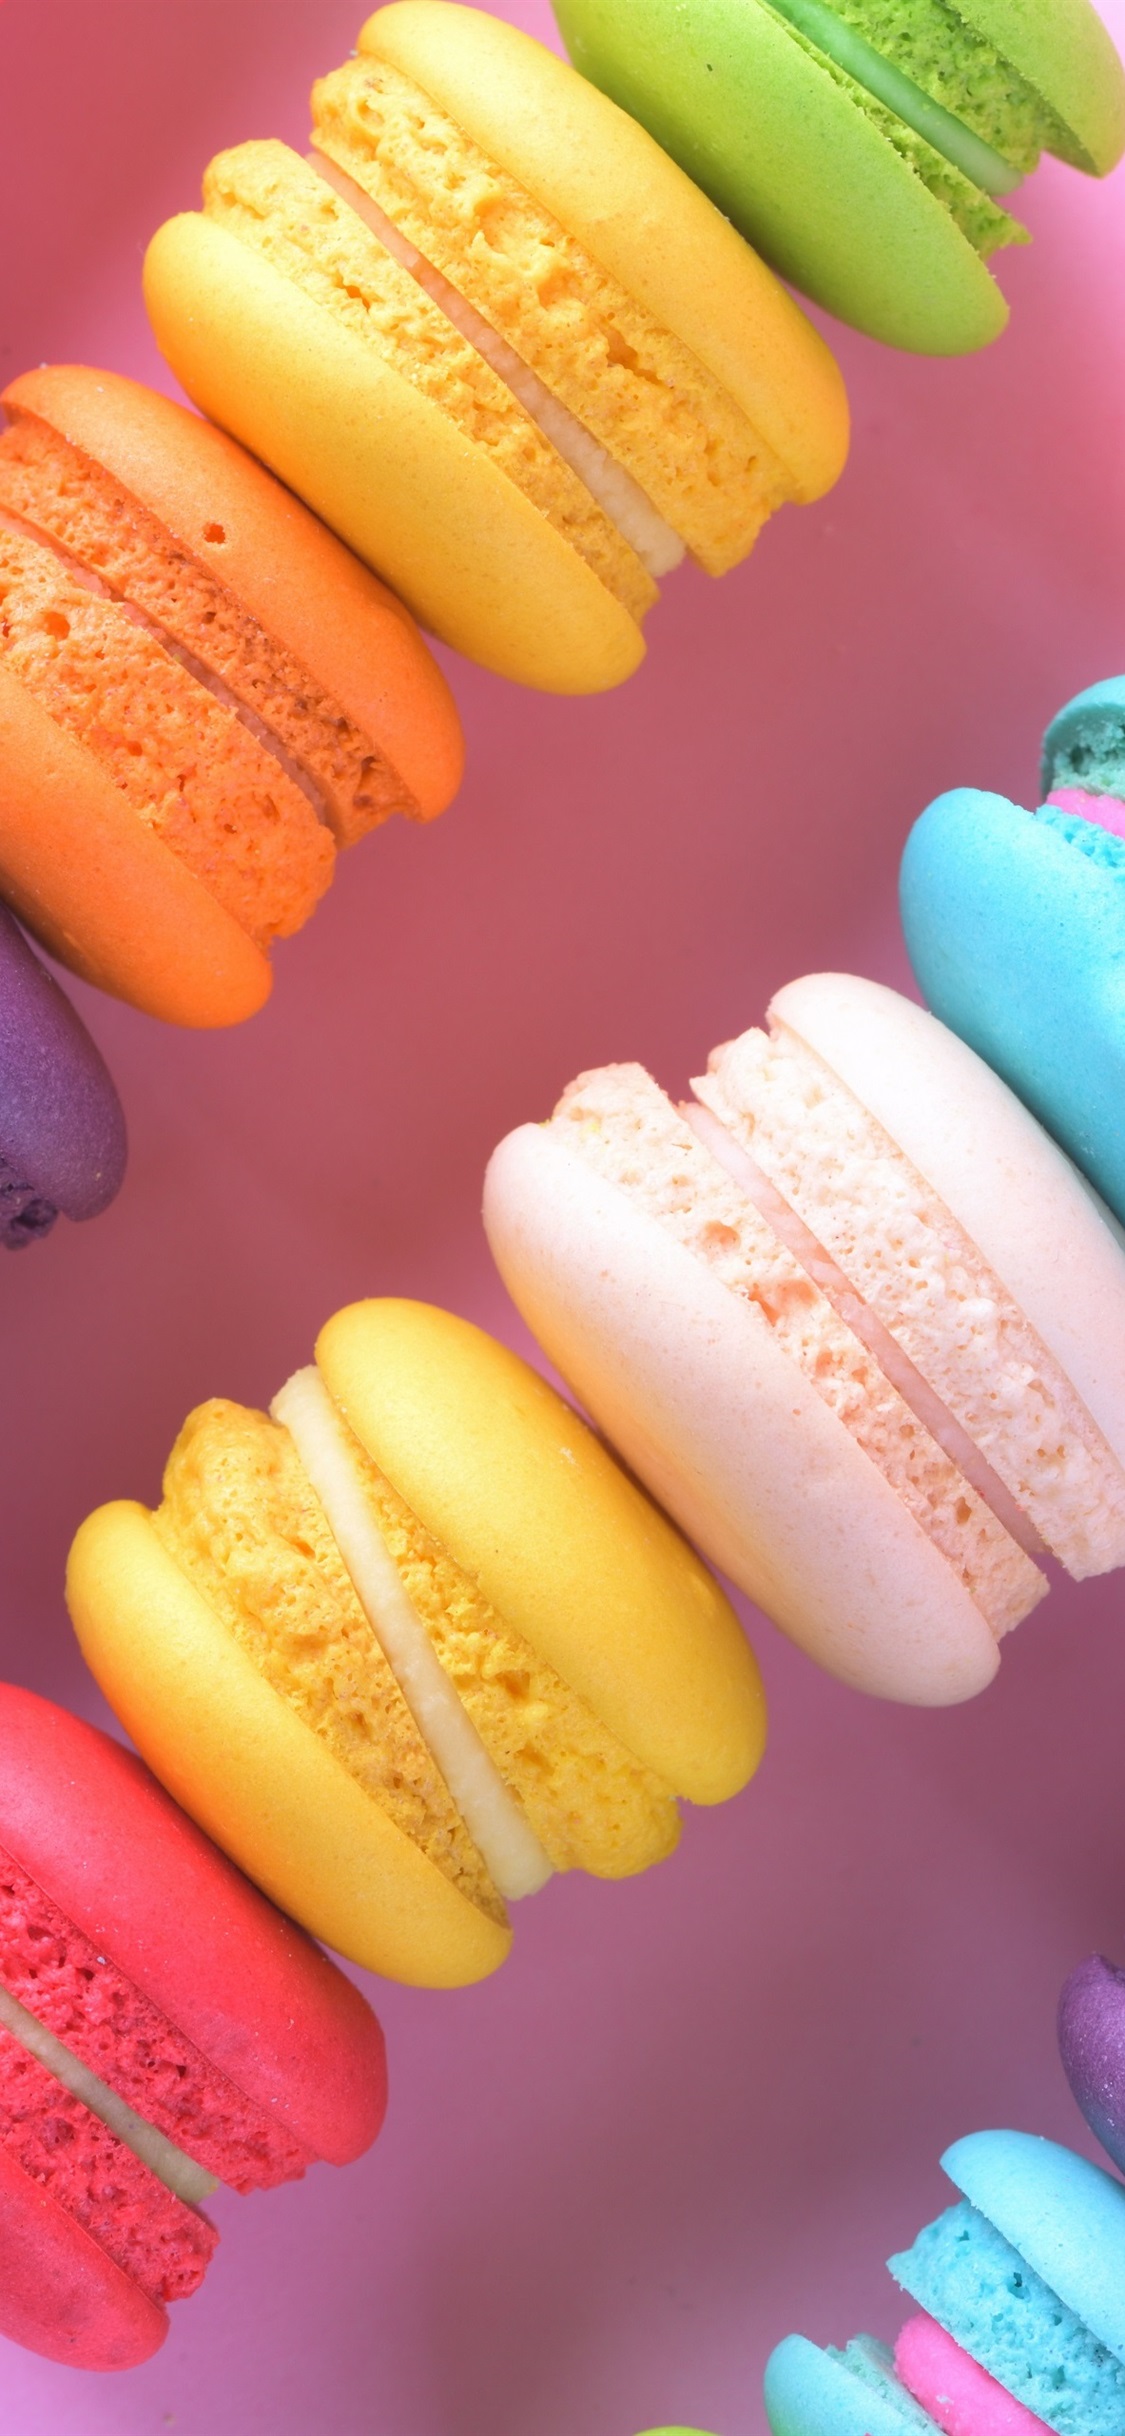 Colorful cakes macaron x iphone proxsx wallpaper background picture image